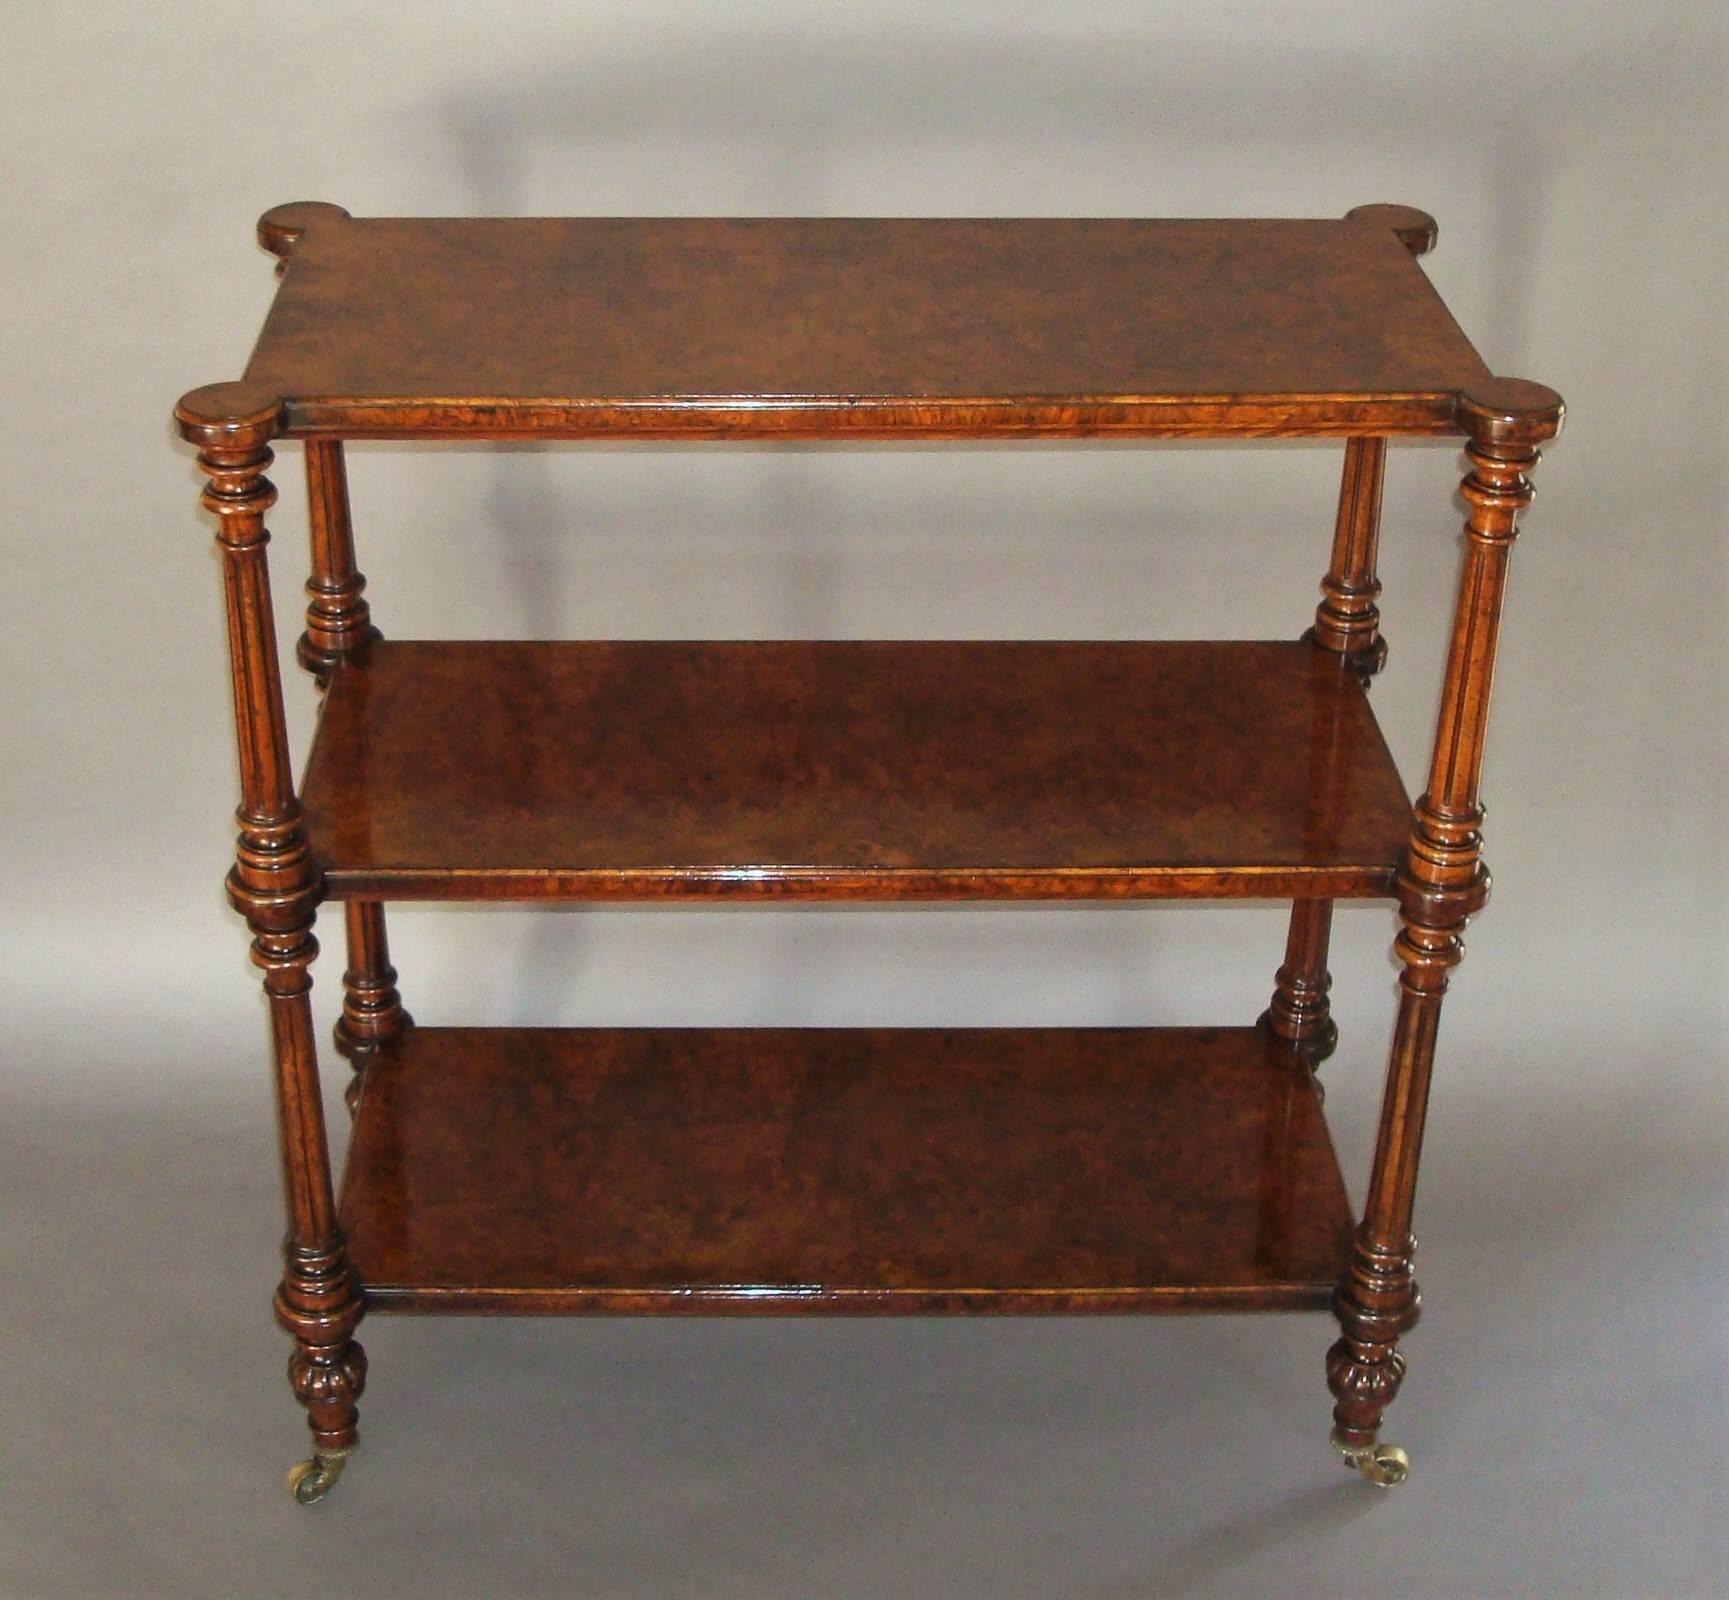 Excellent quality 19th century burr walnut three-tier étagère of elegant proportions, the three rectangular tiers with protruding circular corners in good quality burr walnut with slim moulded edges raised on slender walnut, turned, tapering,